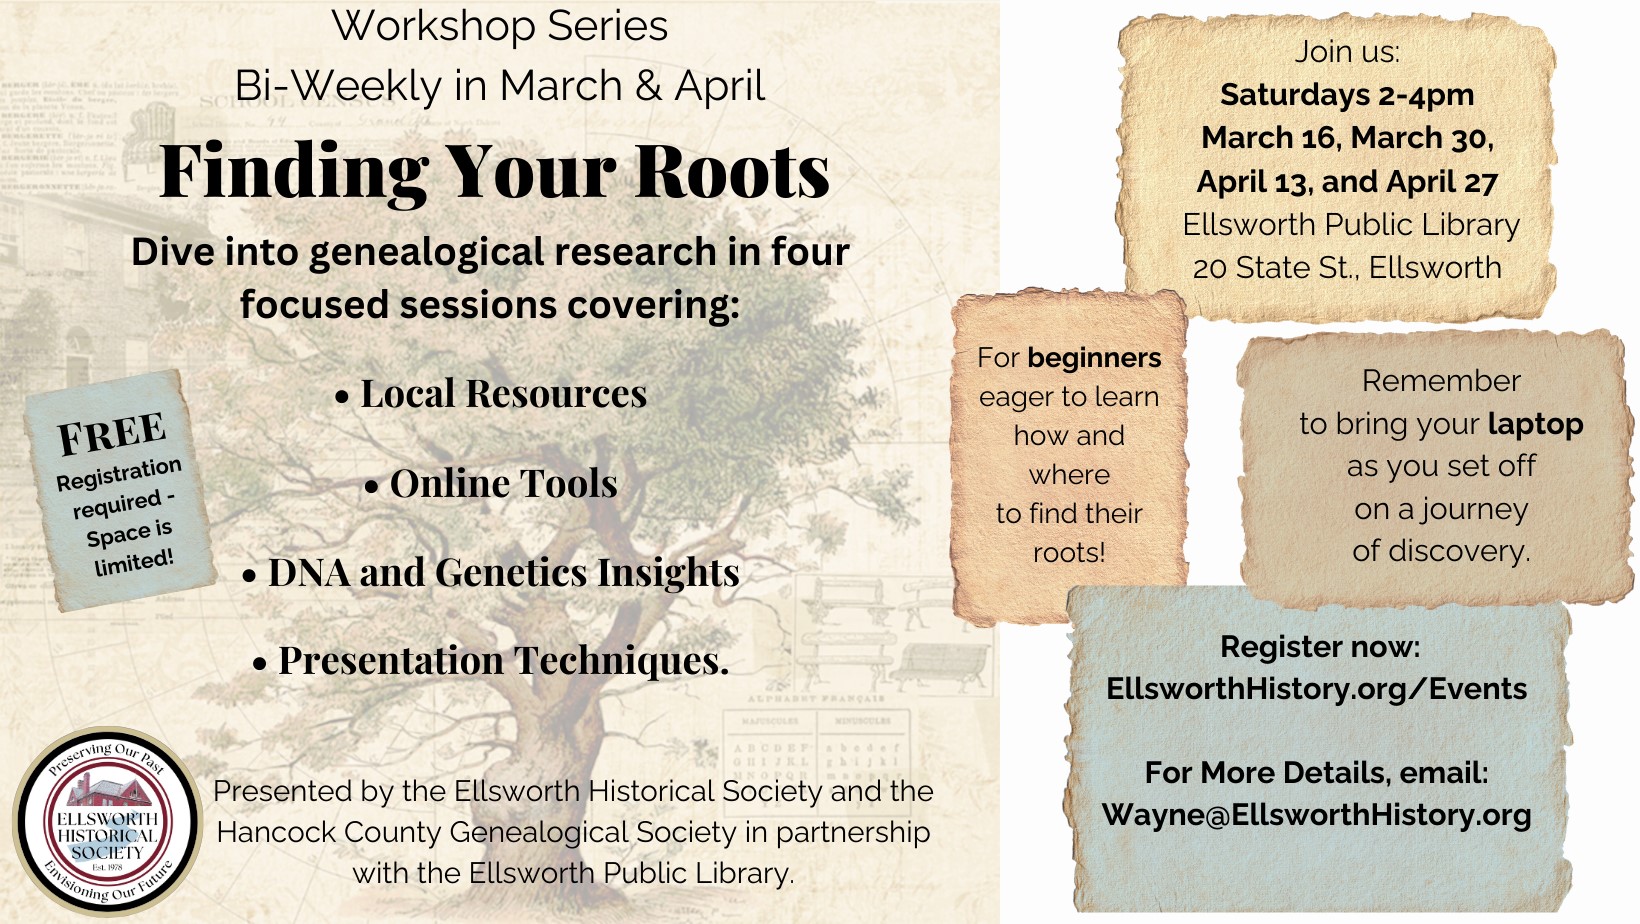 Finding Your Roots: bi-weekly workshops tracing your family tree